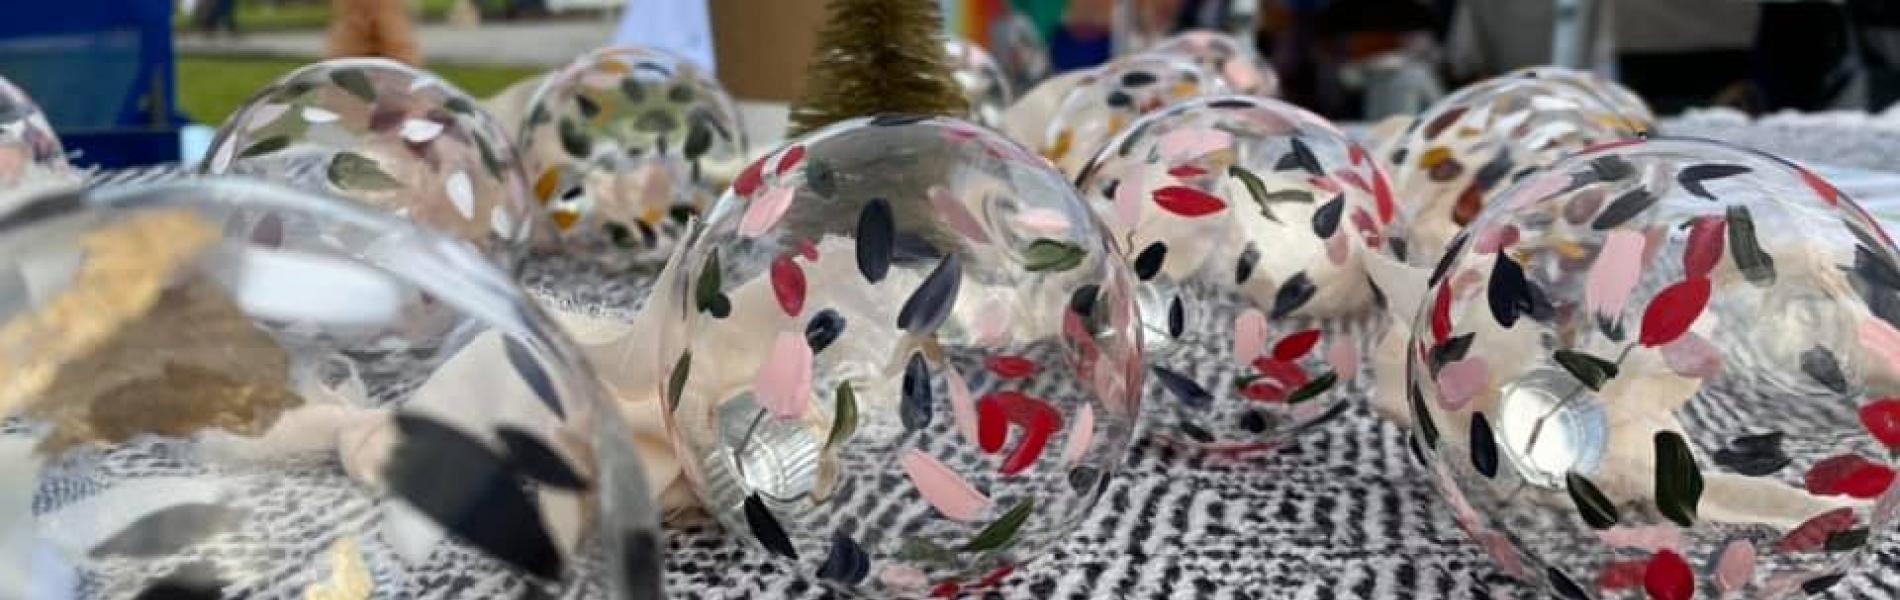 Hand painted ornaments at the Holiday Gift Market